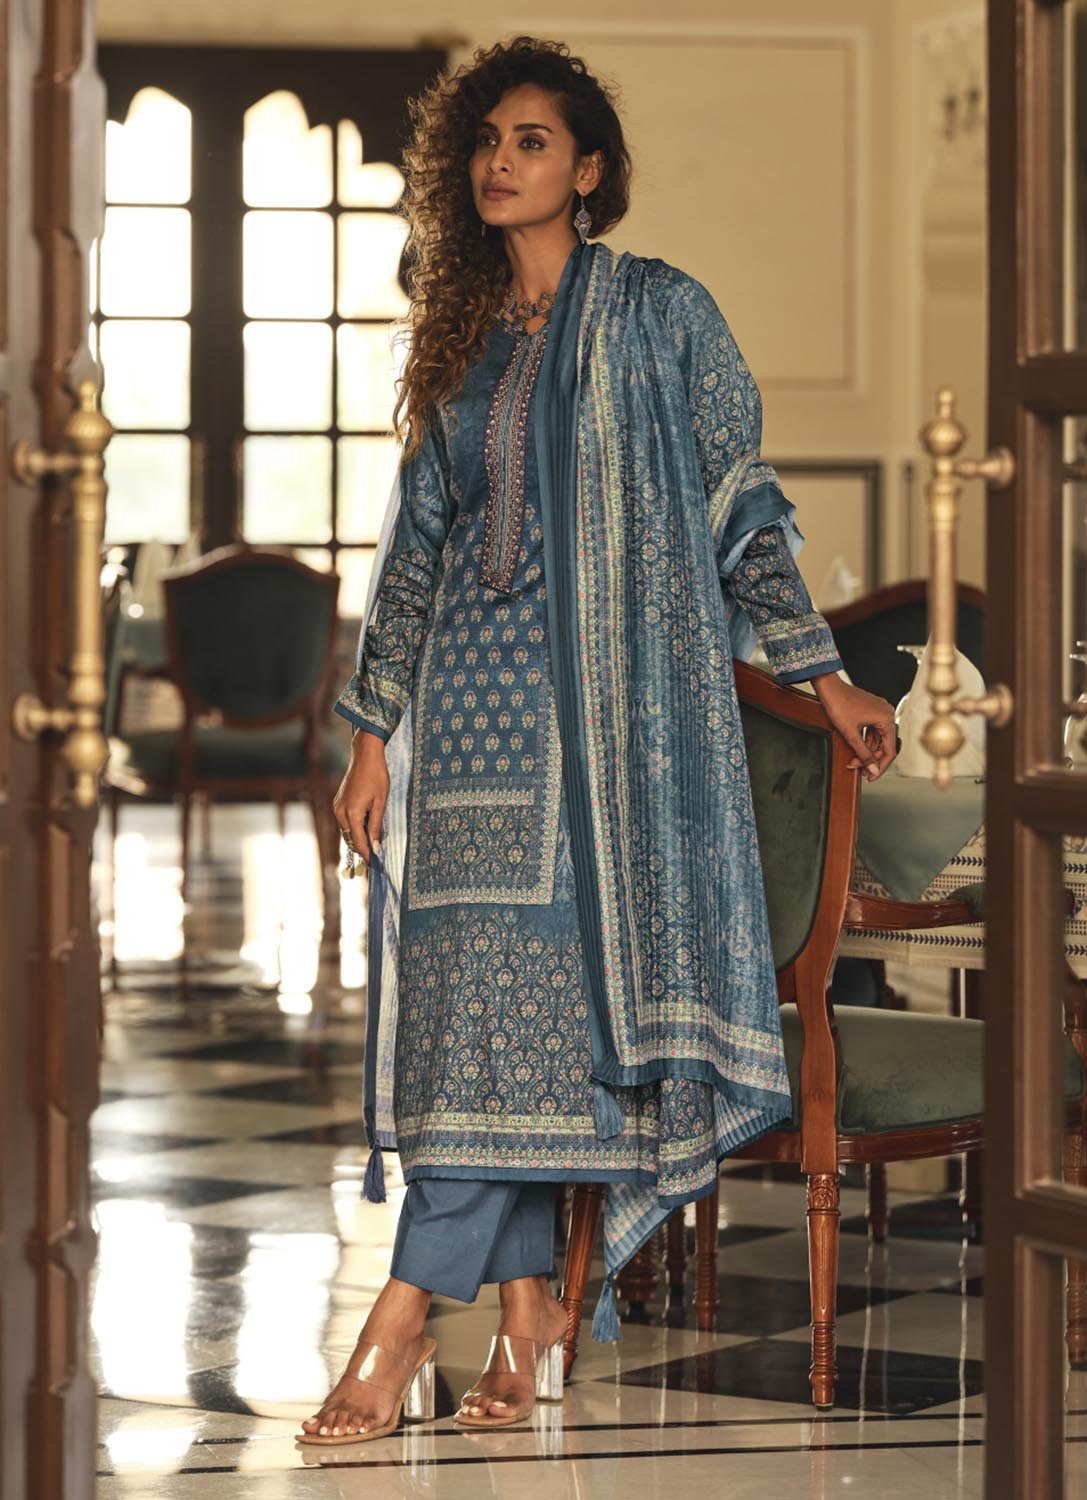 Sadhana Cotton Silk Embroidered Women Unstitched Suit Material Blue